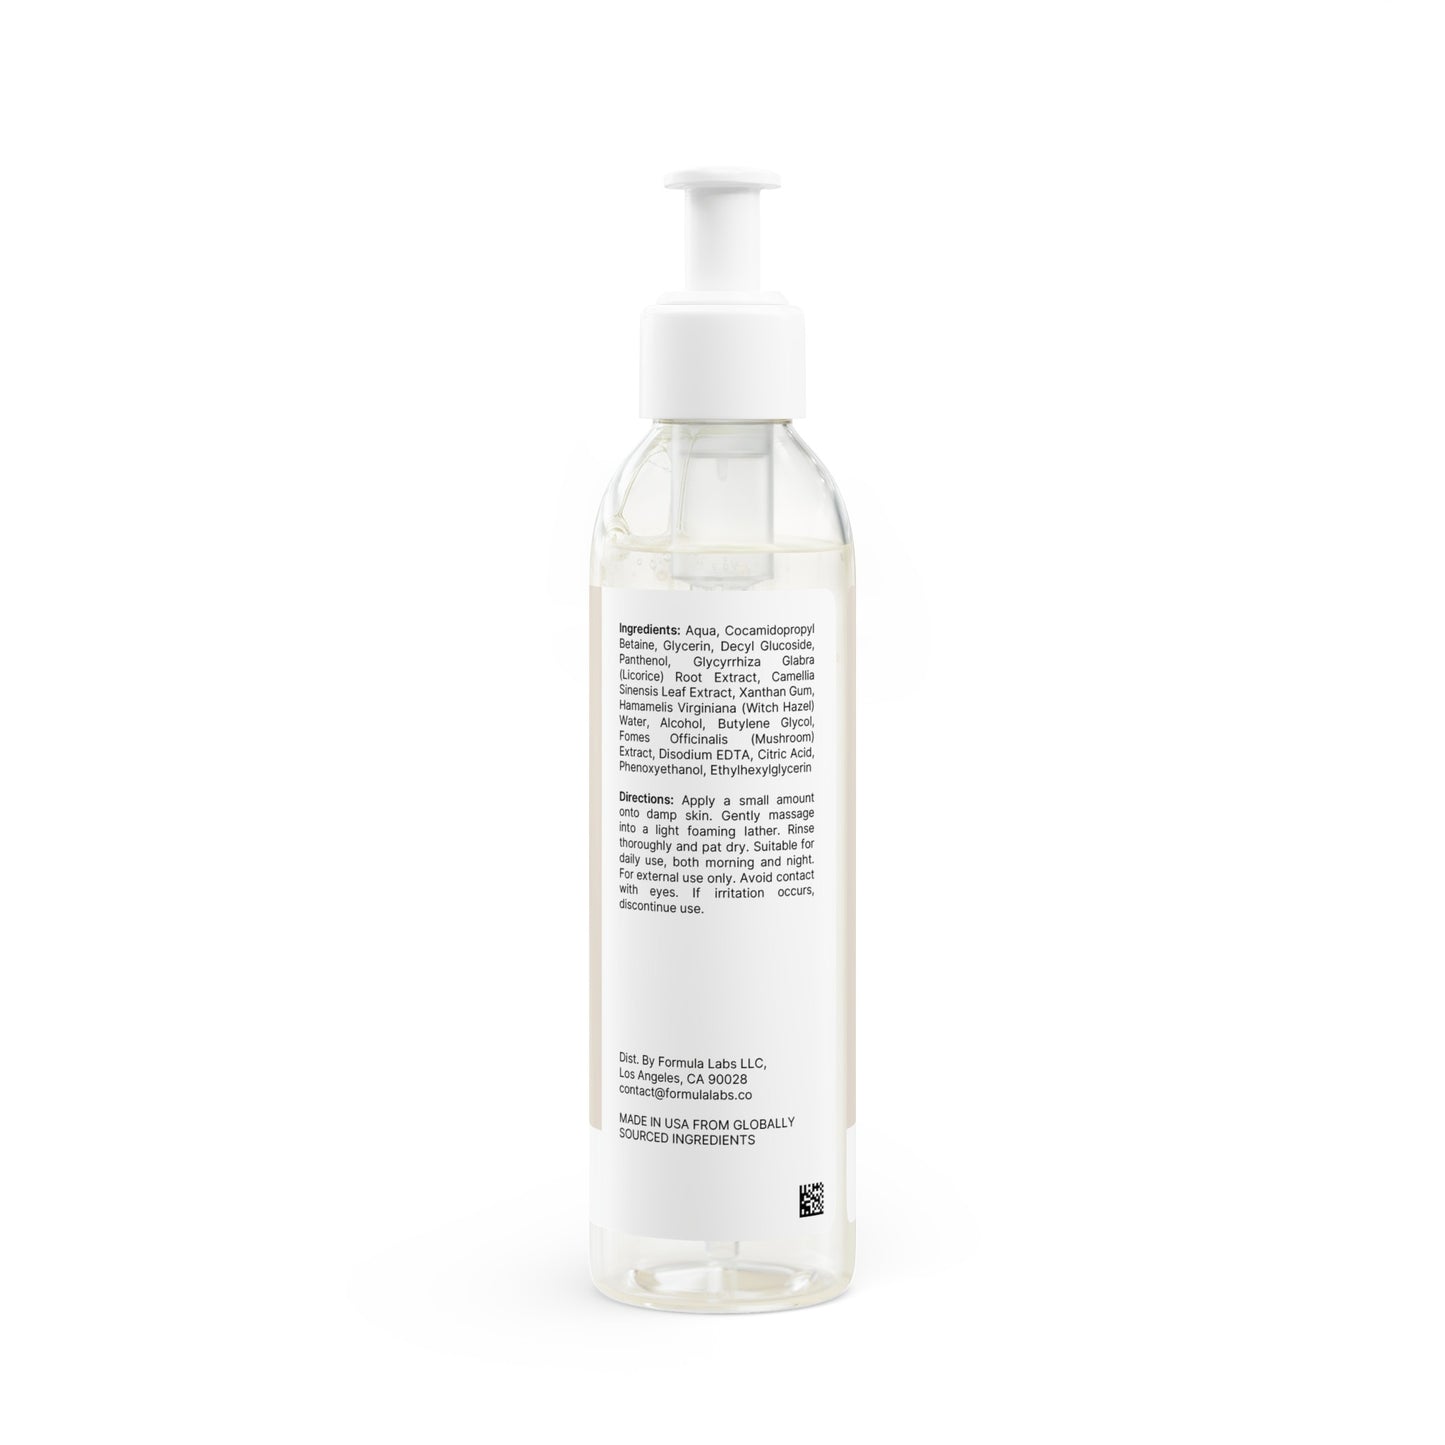 Only Nude Gentle Face and Body Cleanser, 6oz